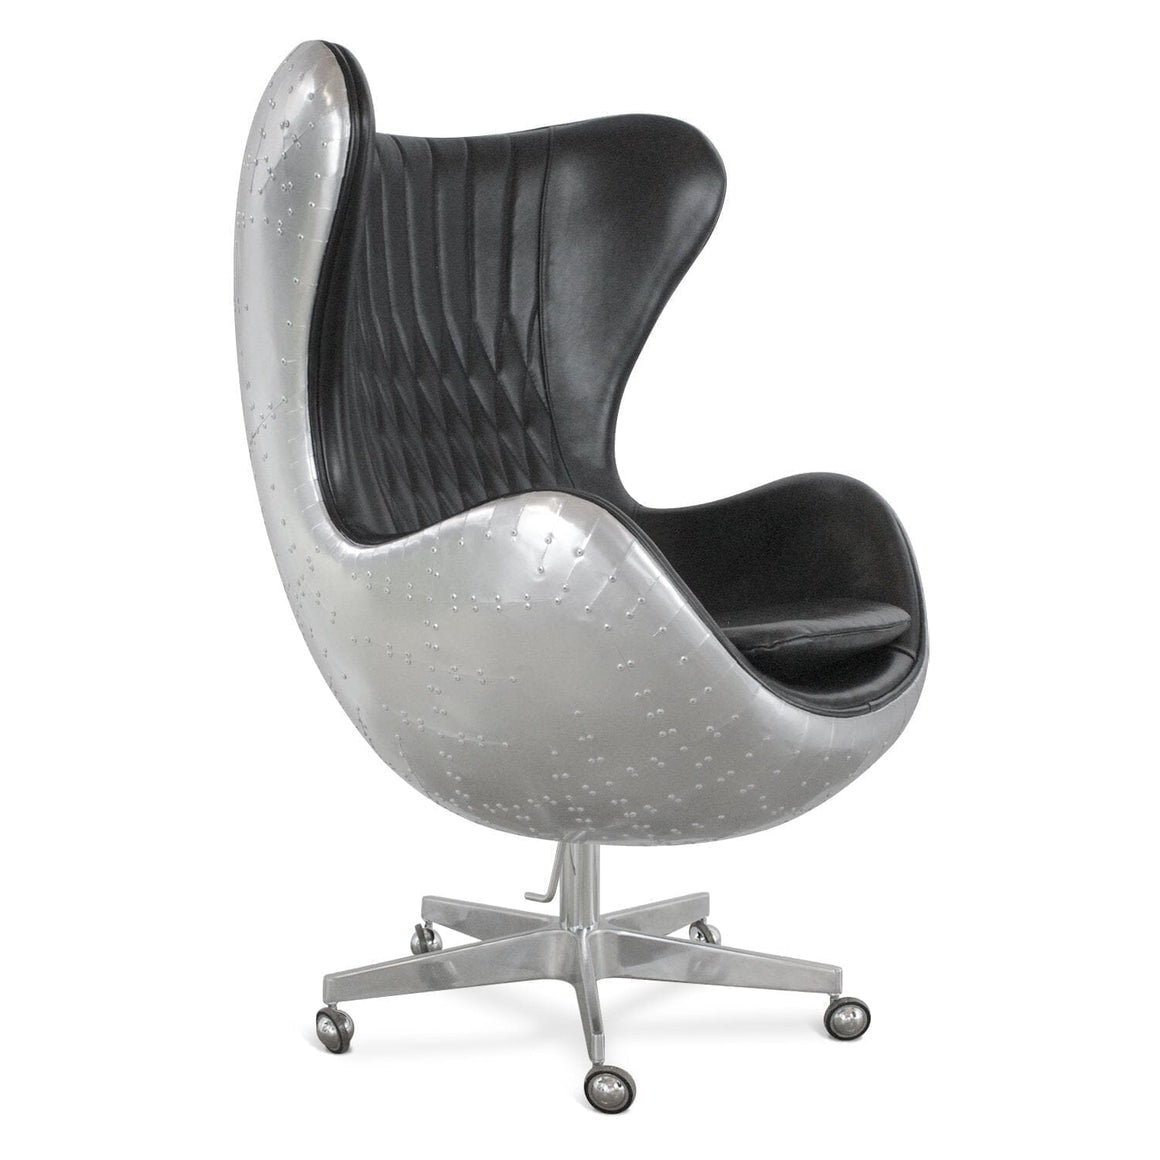 Aviator Egg Office Chair - Aluminum - Black Leather - Swivel - Casters - Rustic Deco Incorporated